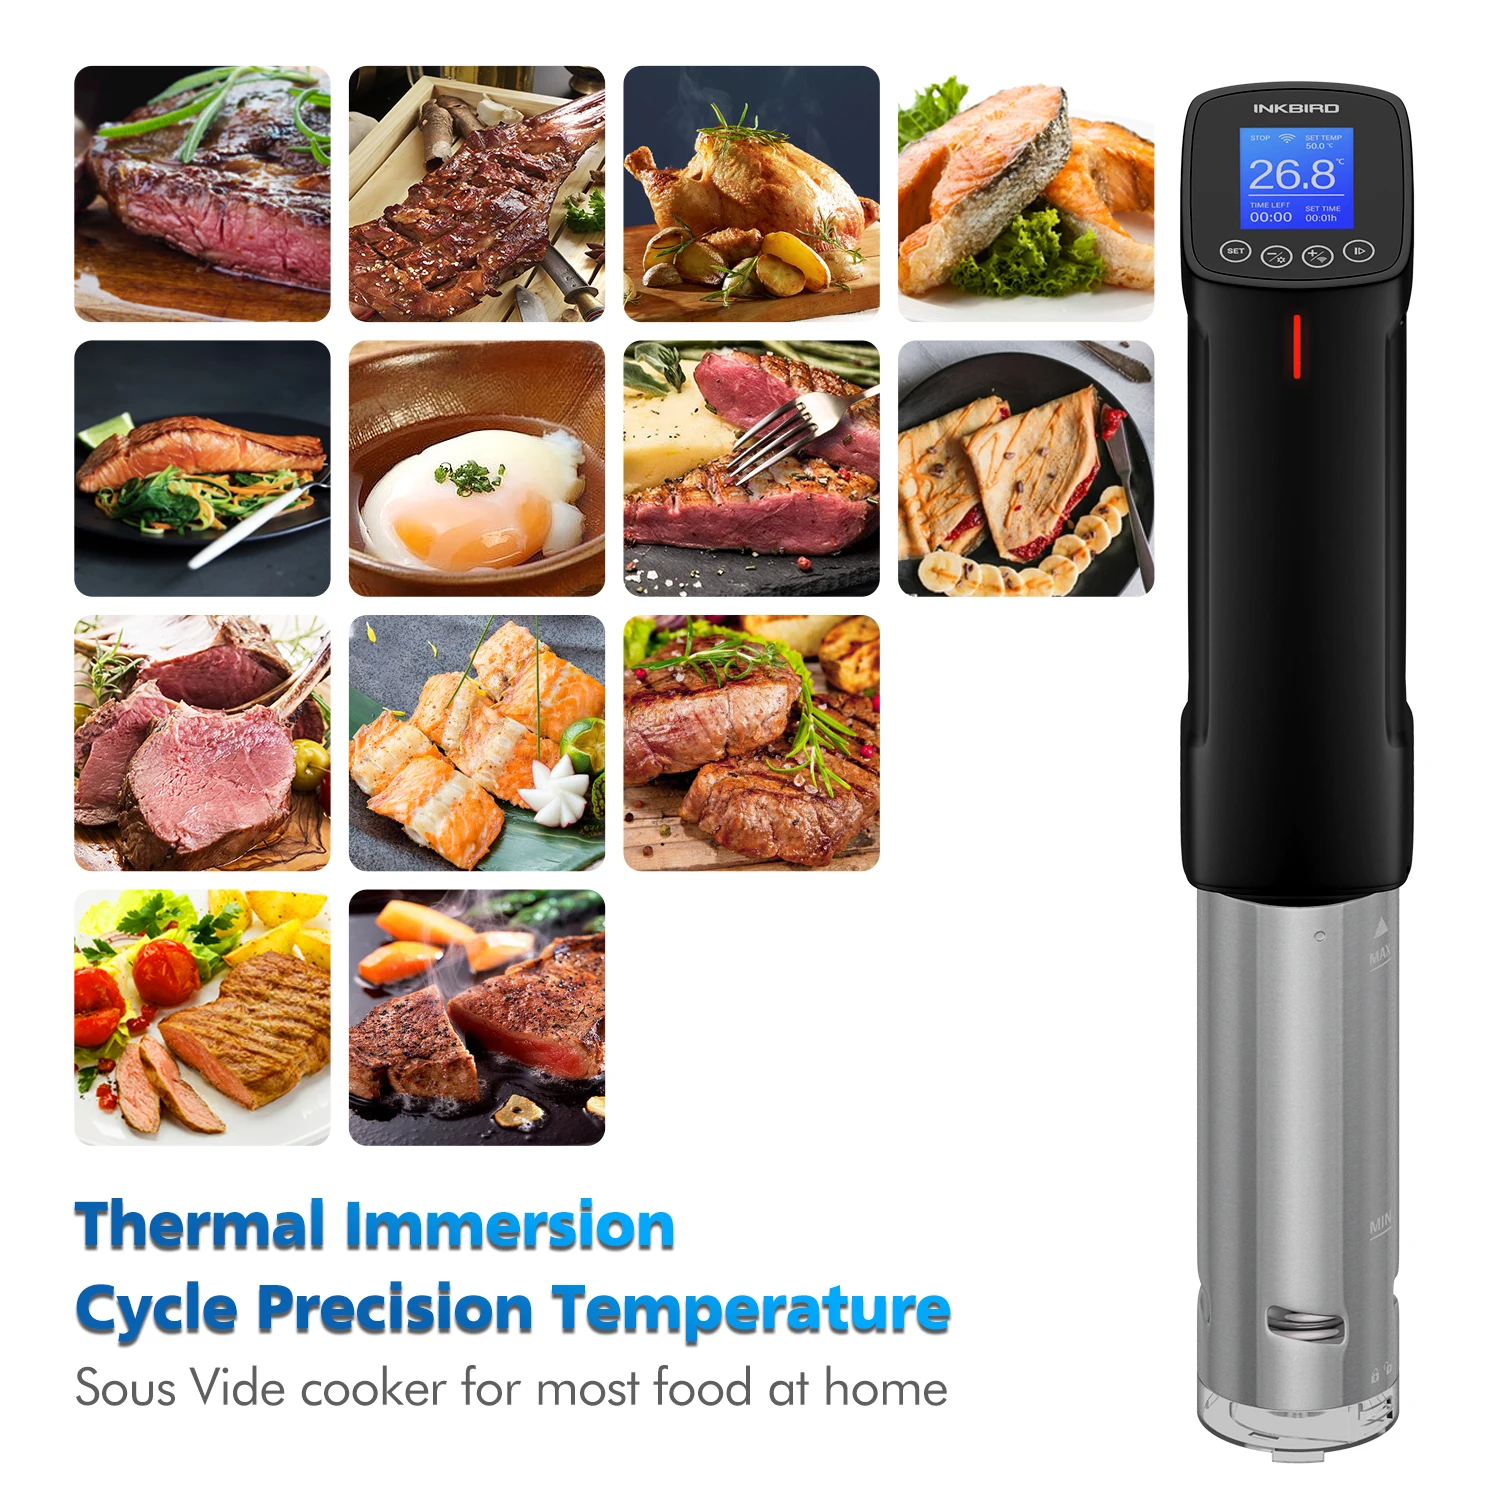 INKBIRD Suv Boiling Water Vacuum Cooker Sous-vide WIFI Kitchen Cooking Tool with 1000W Immersion Circulator LCD Display Timer enlarge